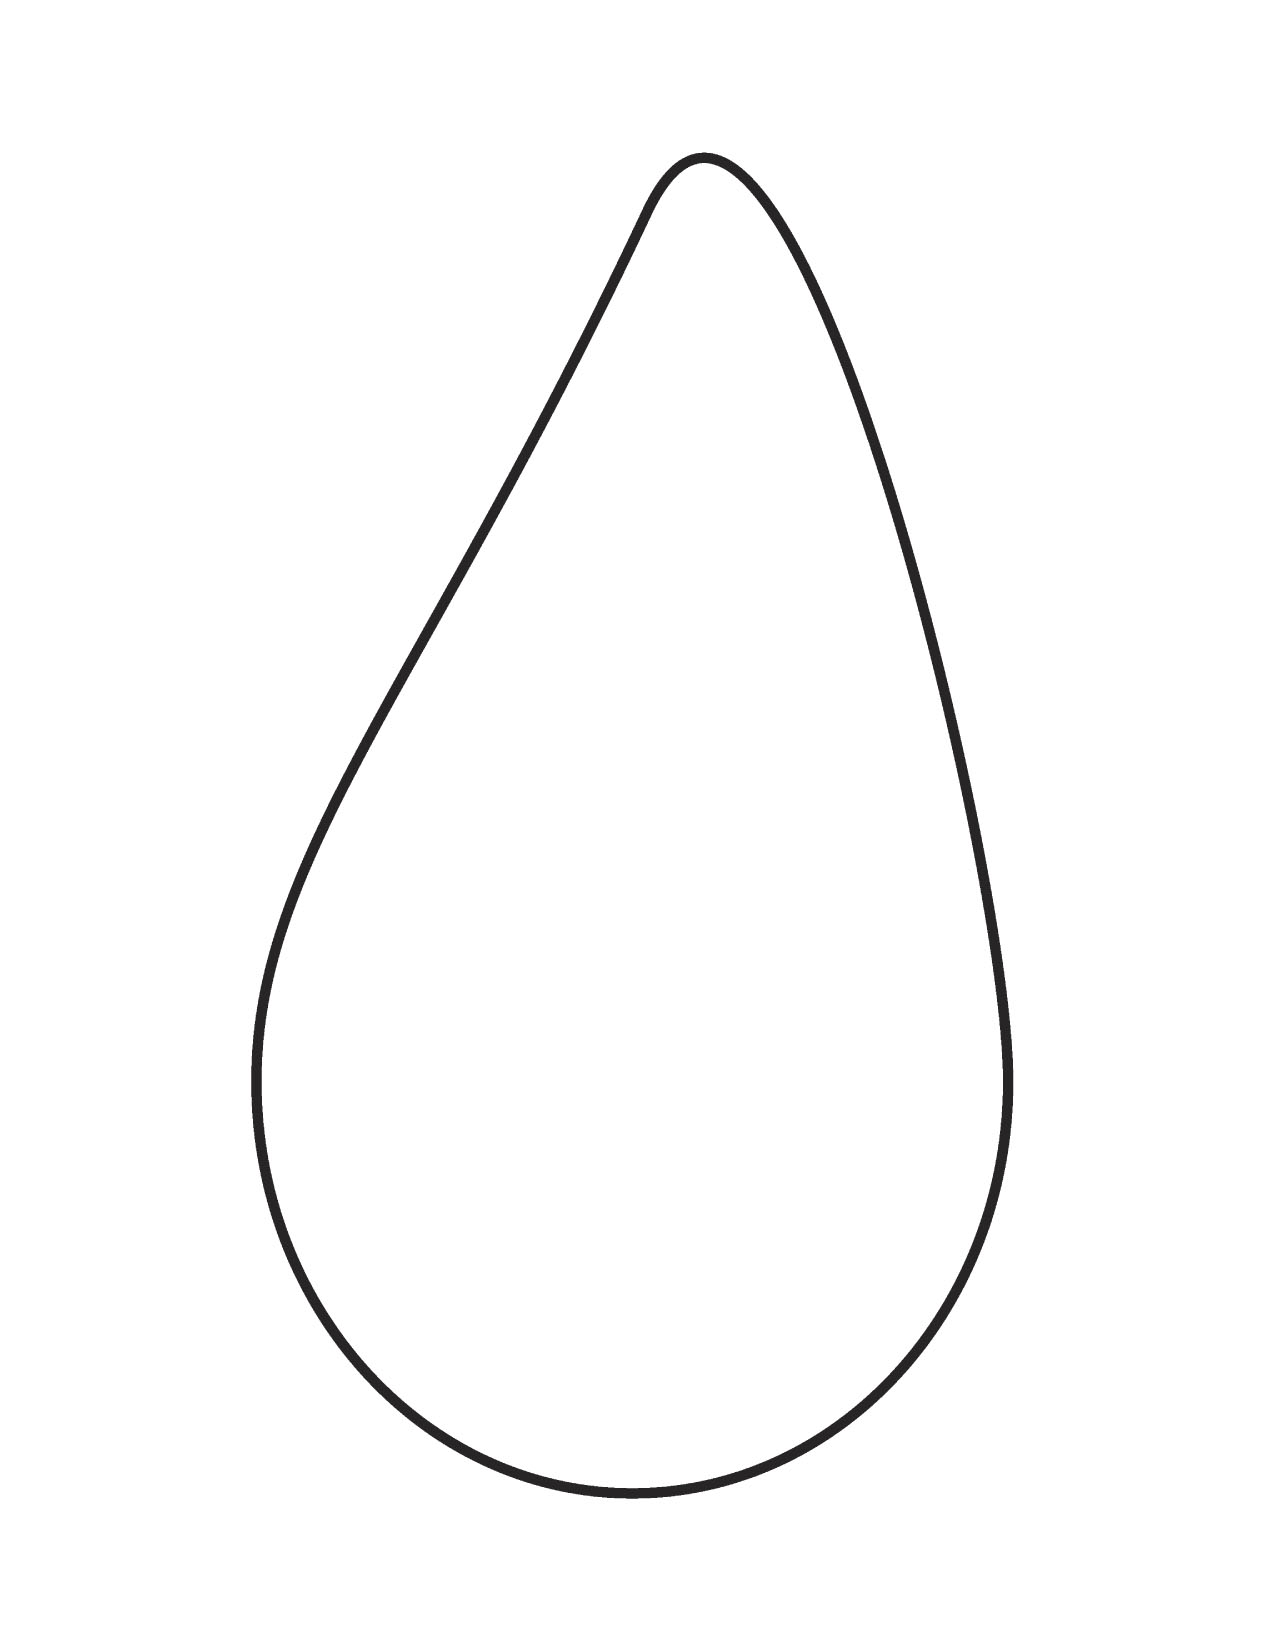 Raindrop Template Printable - Clipart library